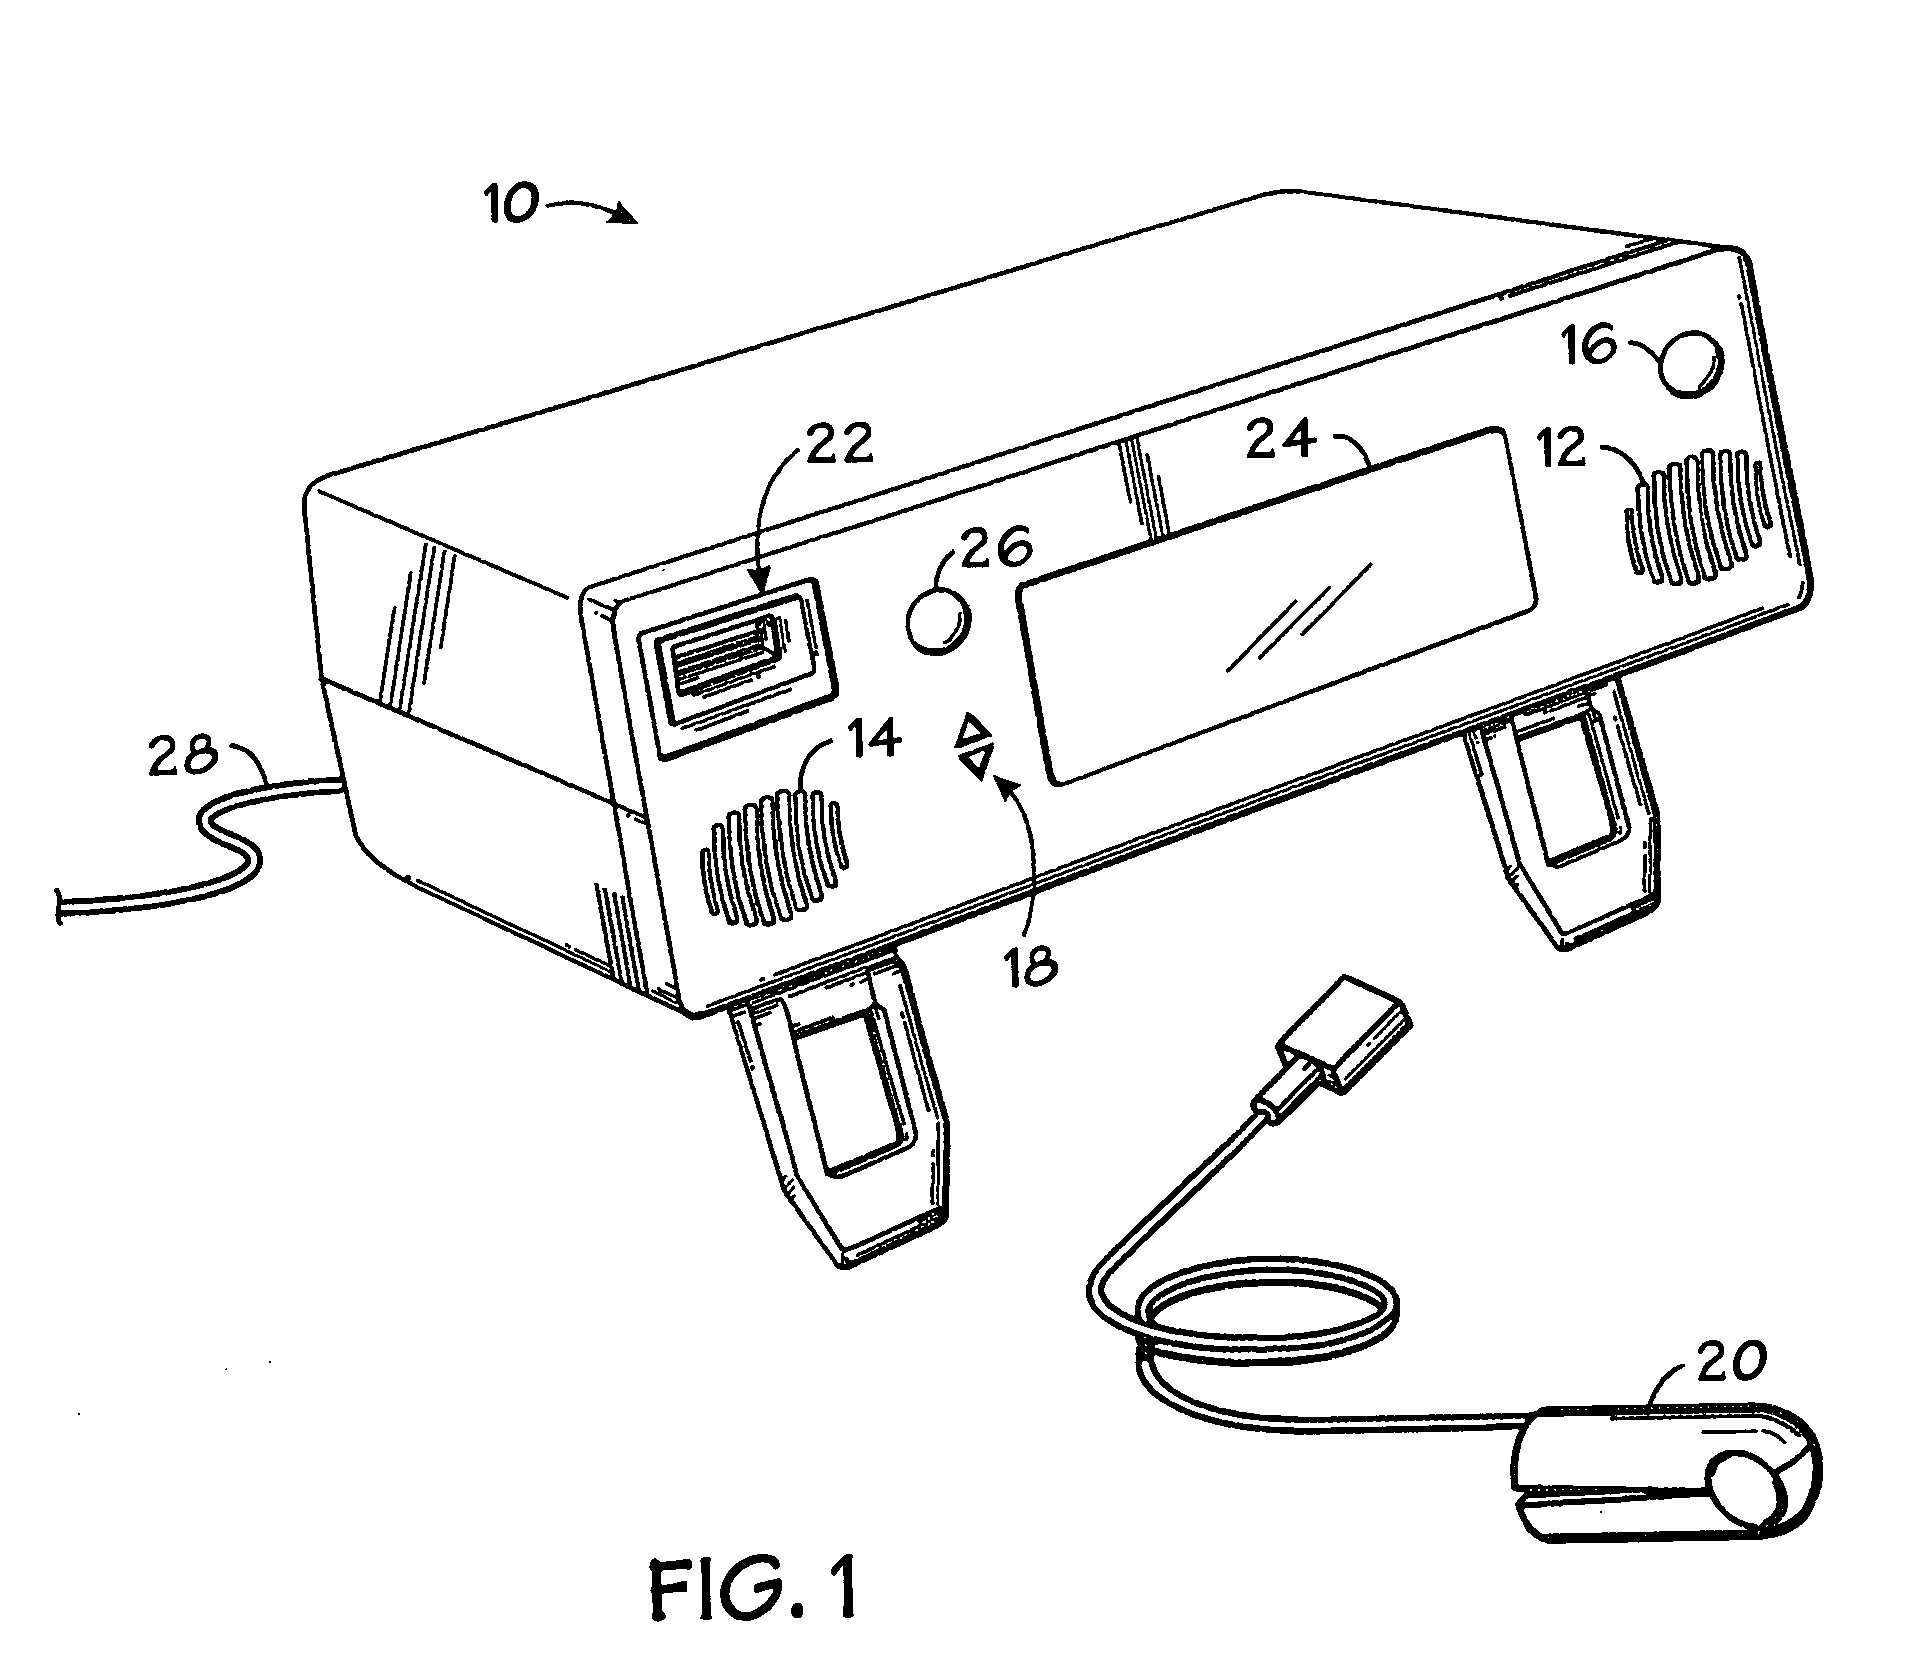 Patient monitoring alarm escalation system and method